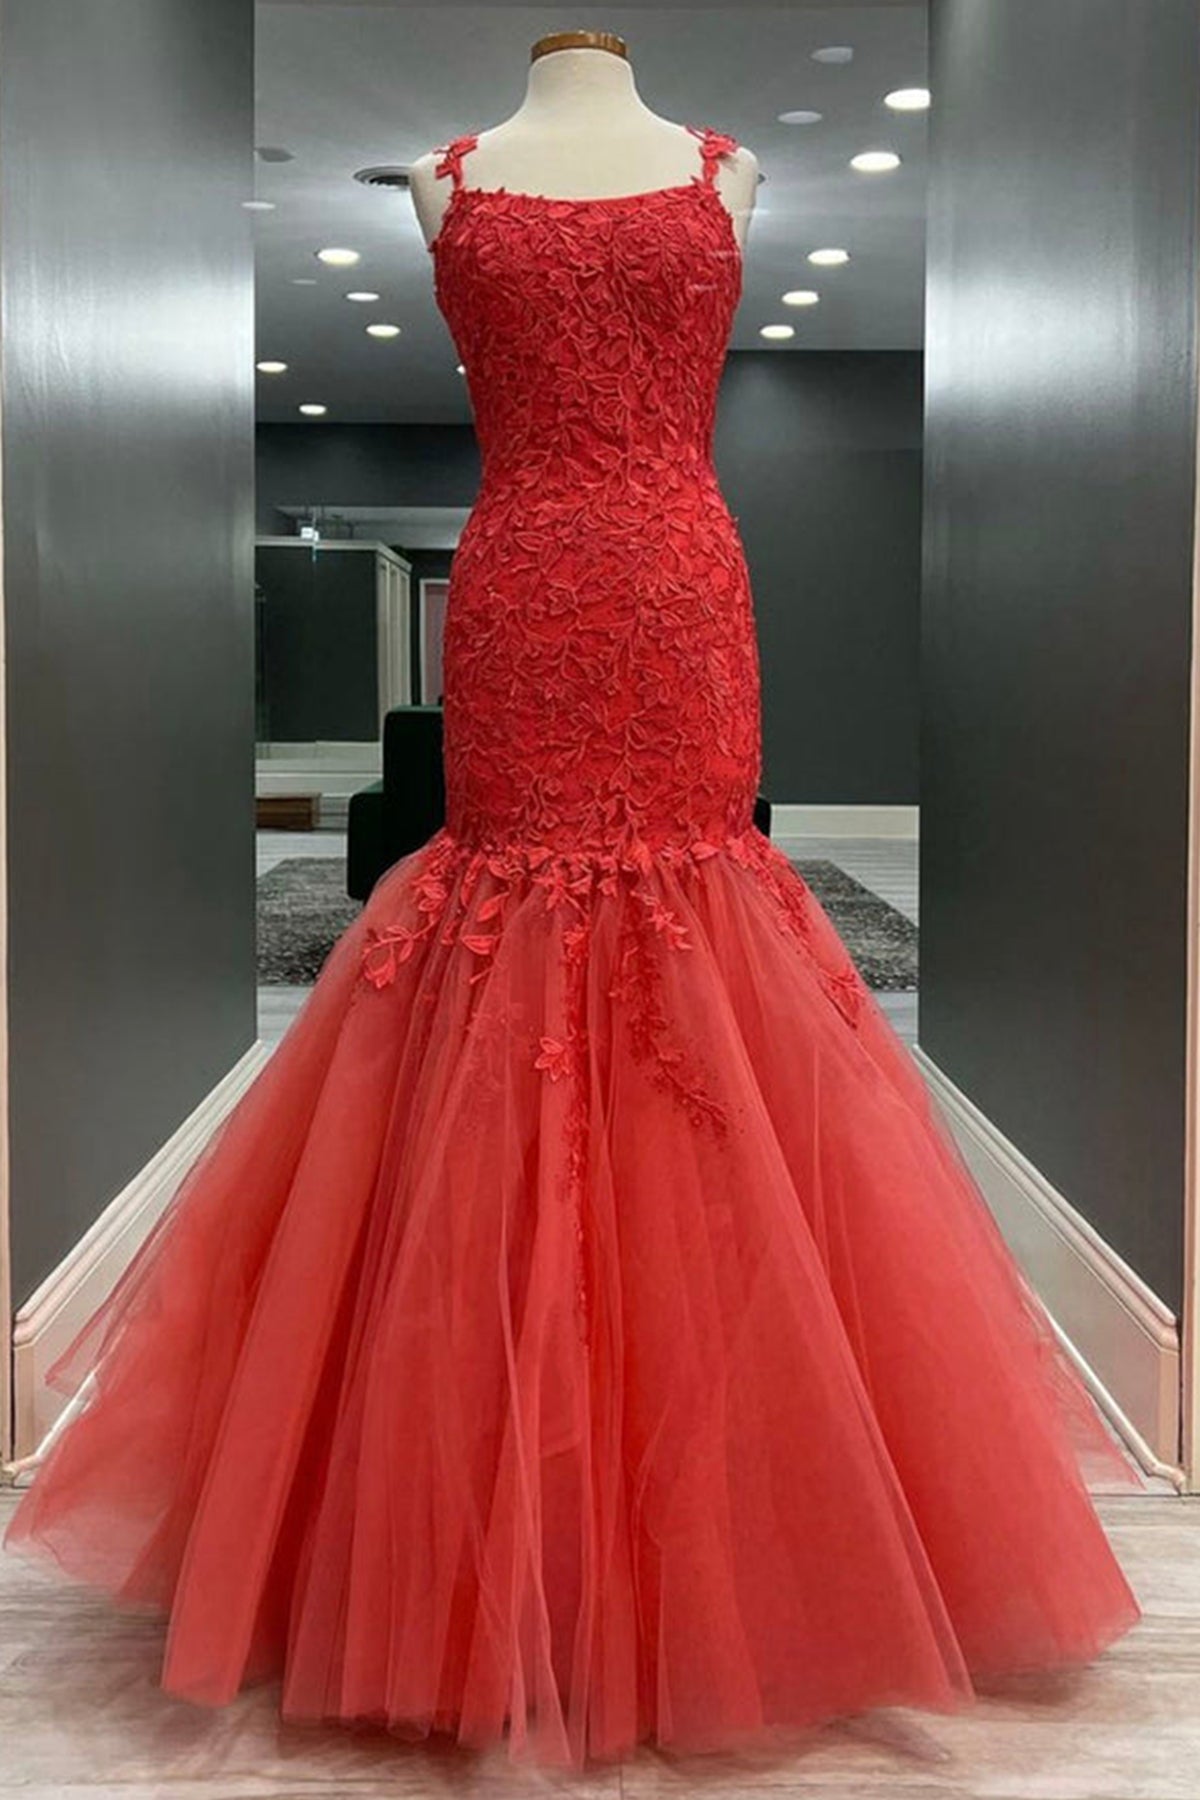 Mermaid Red Tulle Lace Long Prom Dresses, Mermaid Red Formal Dresses, Red Lace Evening Dresses EP1751